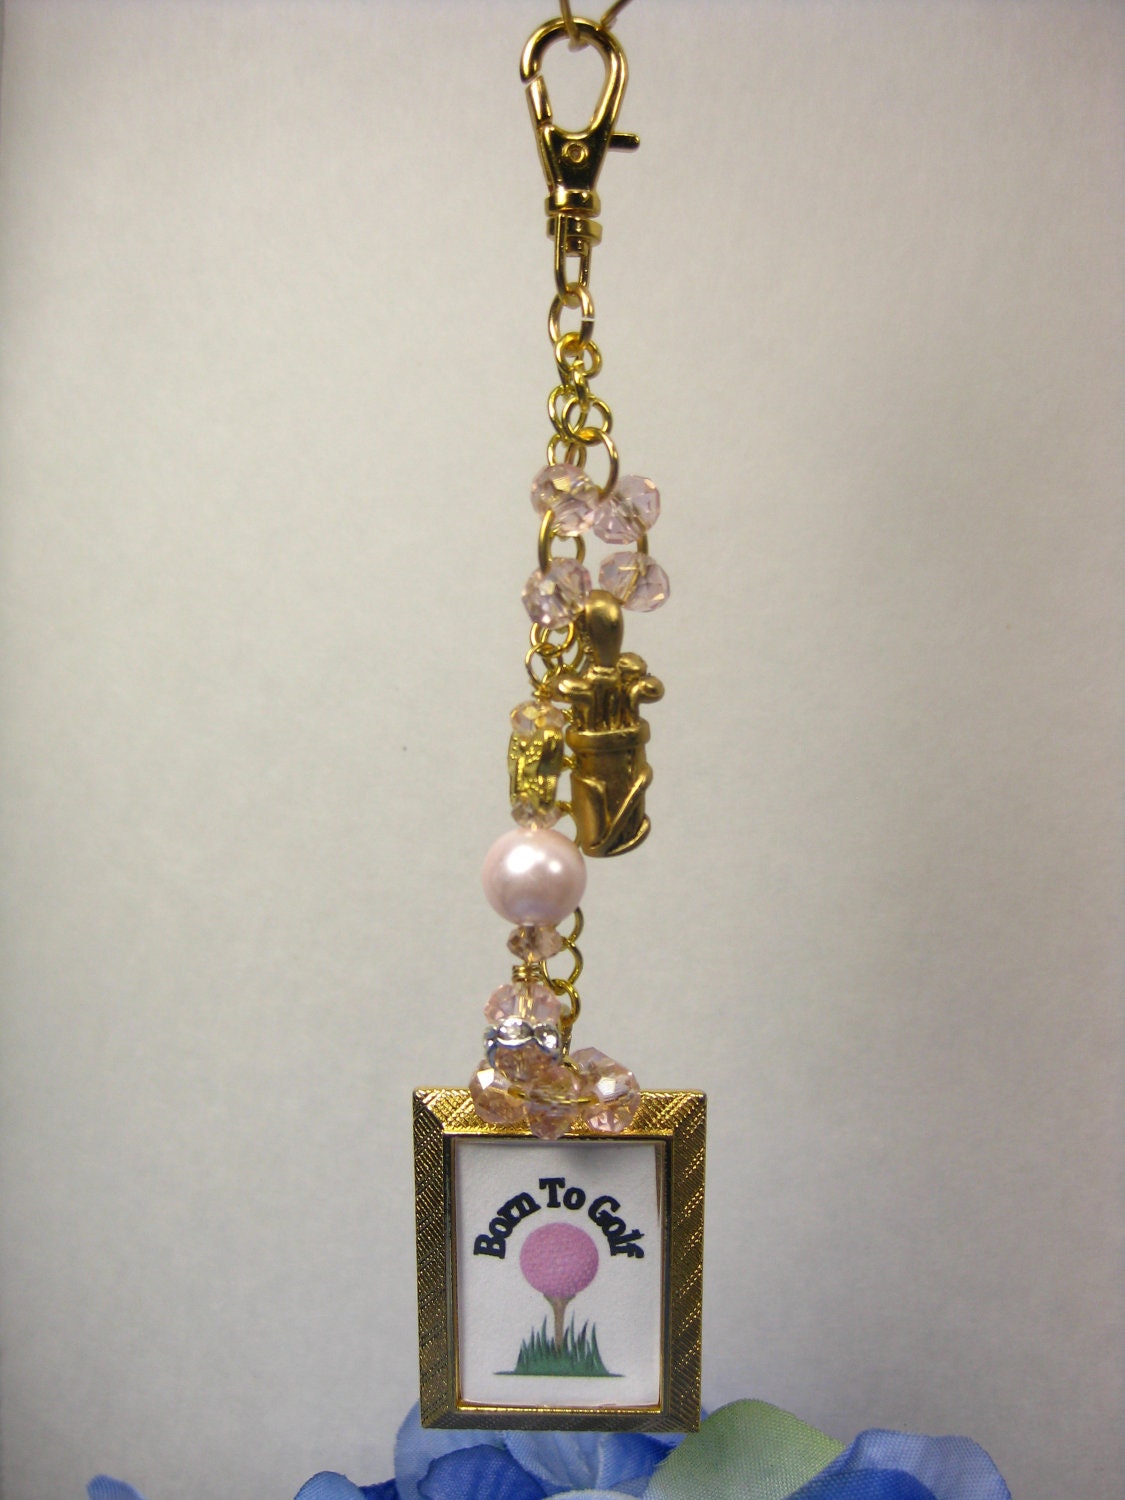 Born To Golf Charm Golf Bag Charm, crystals, pearls, butterfly, and a golf bag charm add that feminine touch to your golf bag or purse.